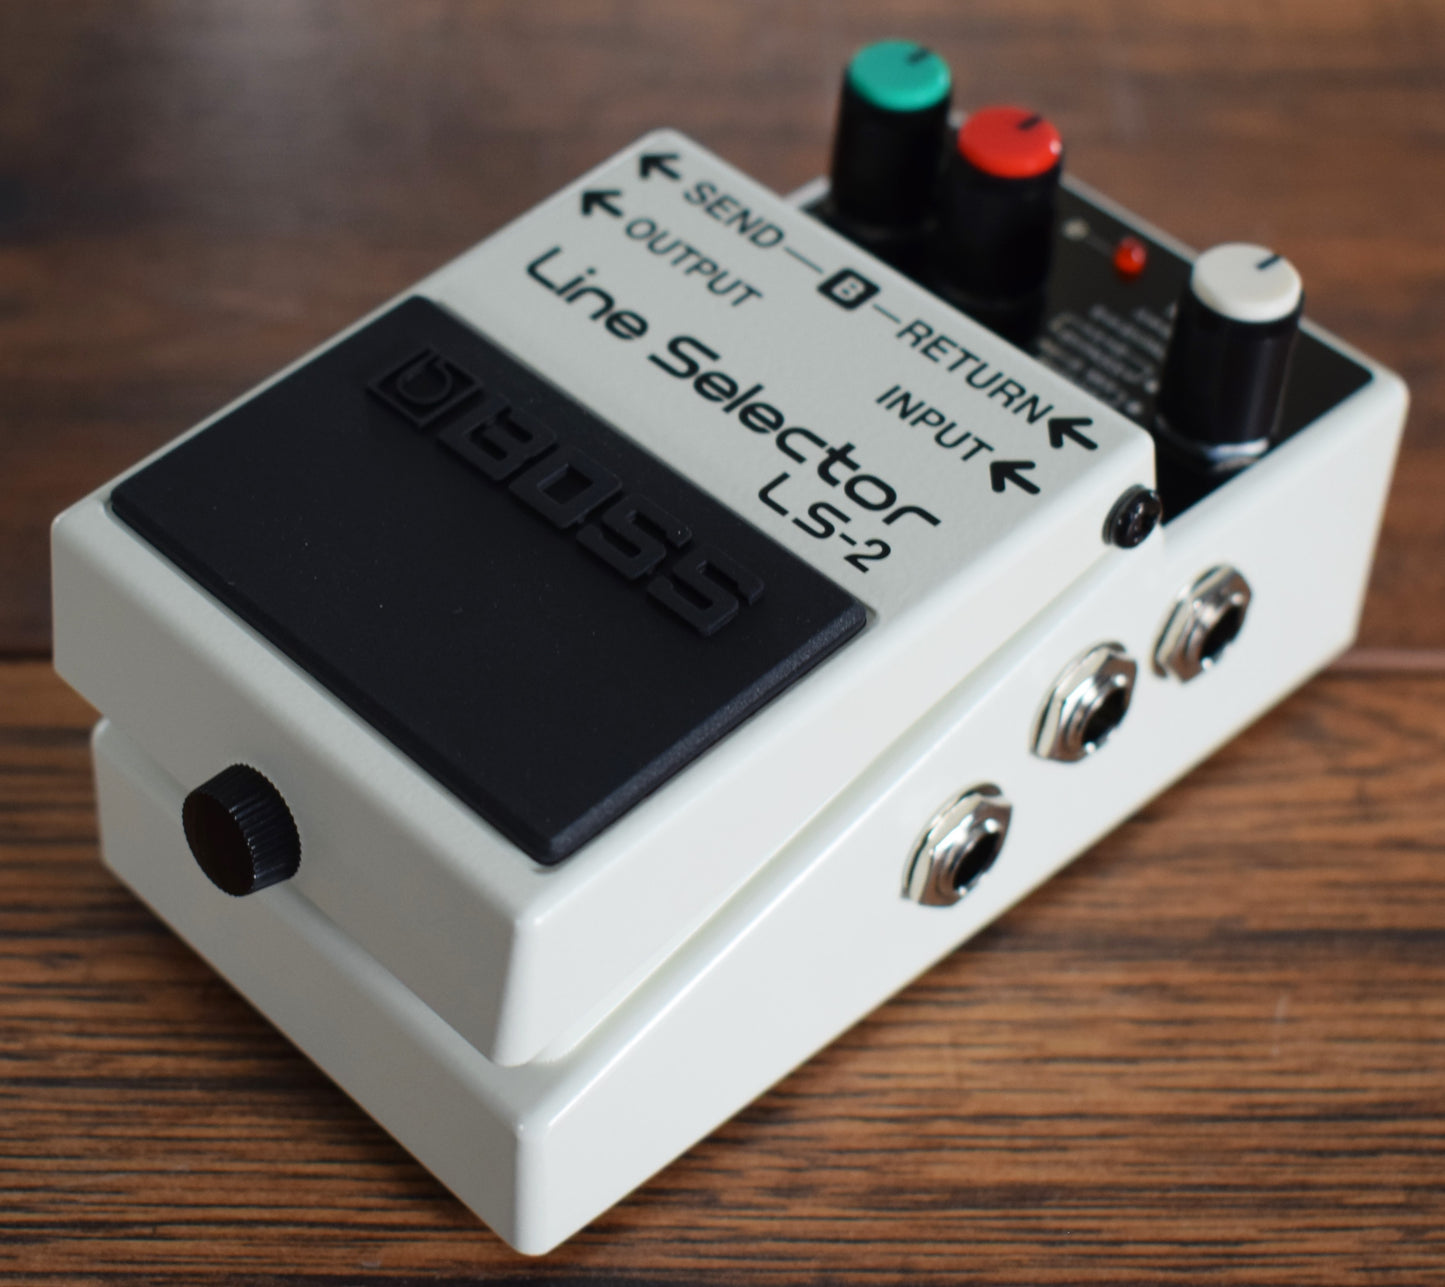 Boss LS-2 Line Selector AB Switch Guitar Effect Pedal